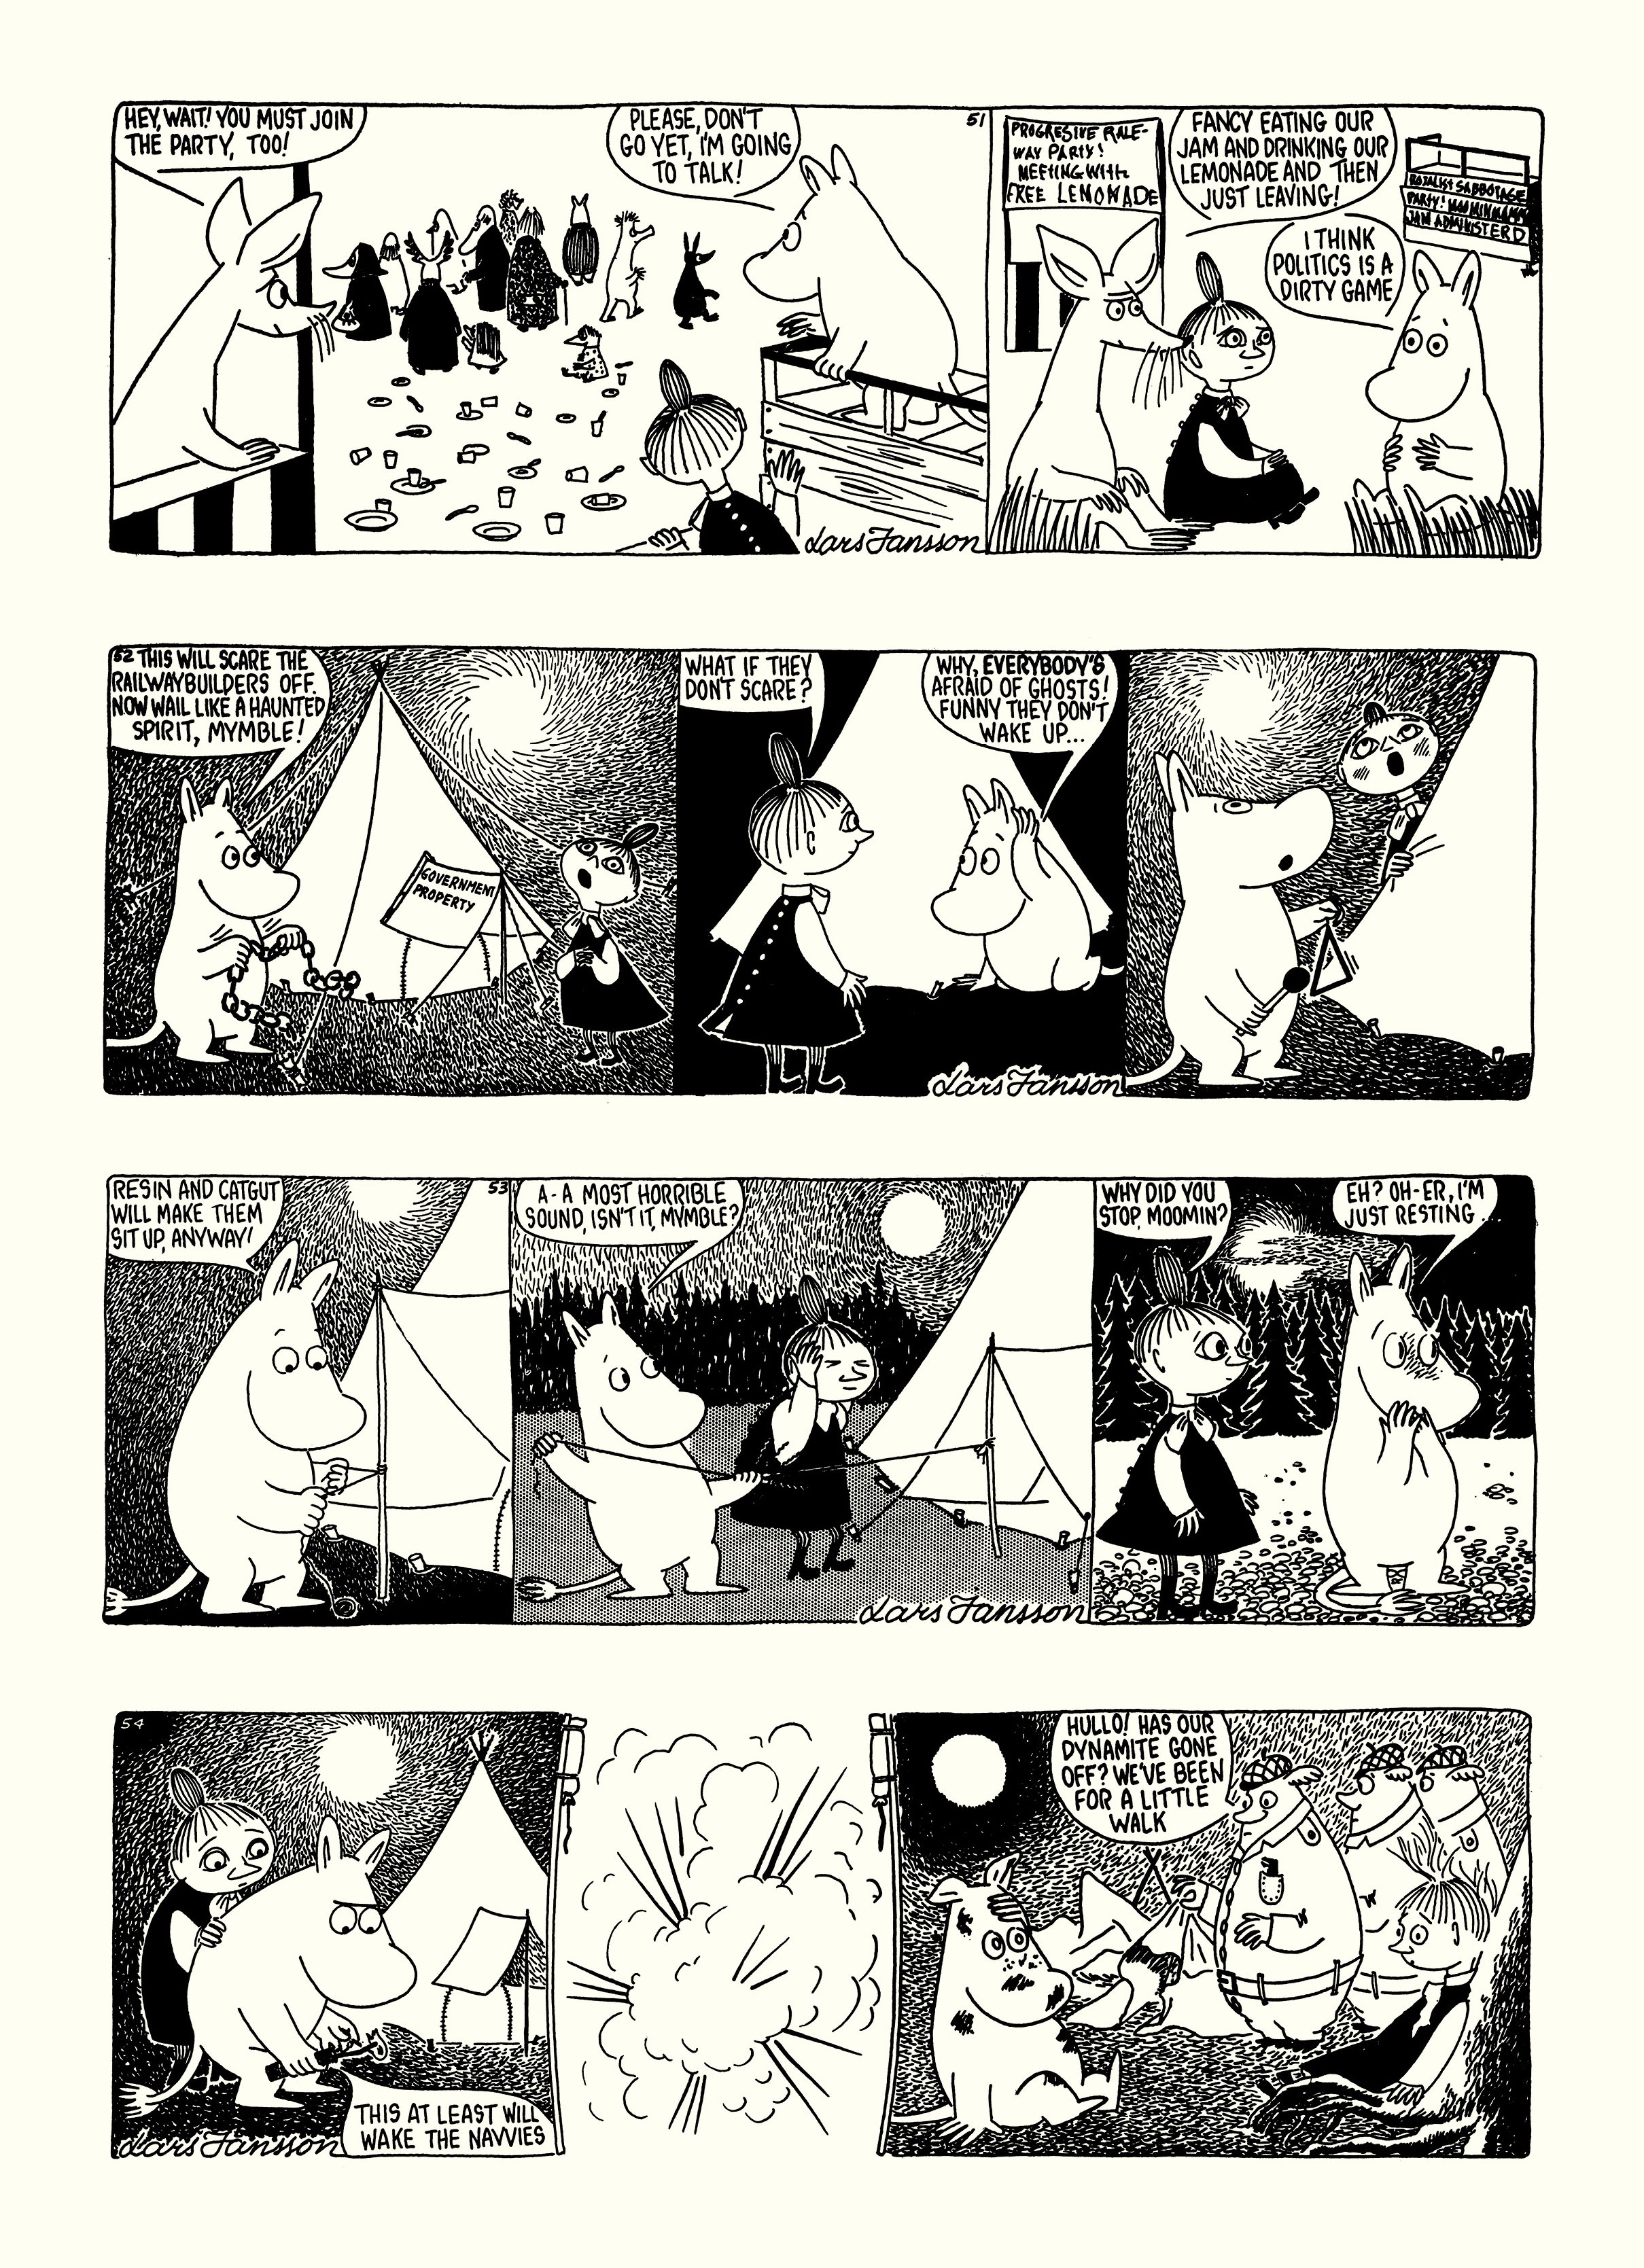 Read online Moomin: The Complete Lars Jansson Comic Strip comic -  Issue # TPB 6 - 39